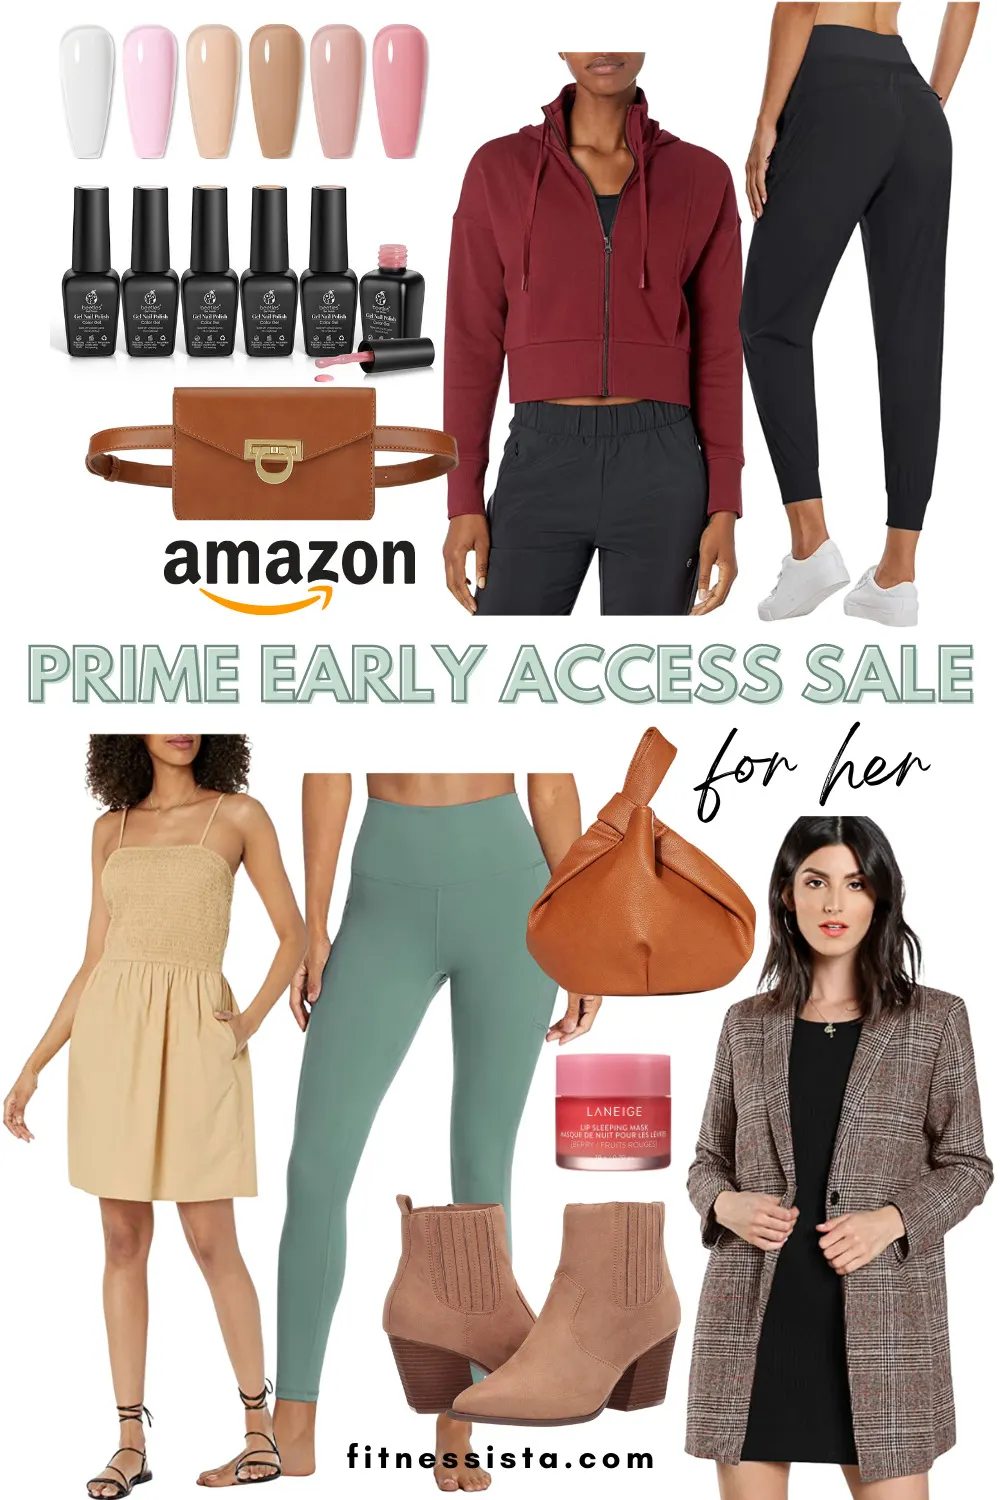 Prime Early Access Sale Top Picks for women